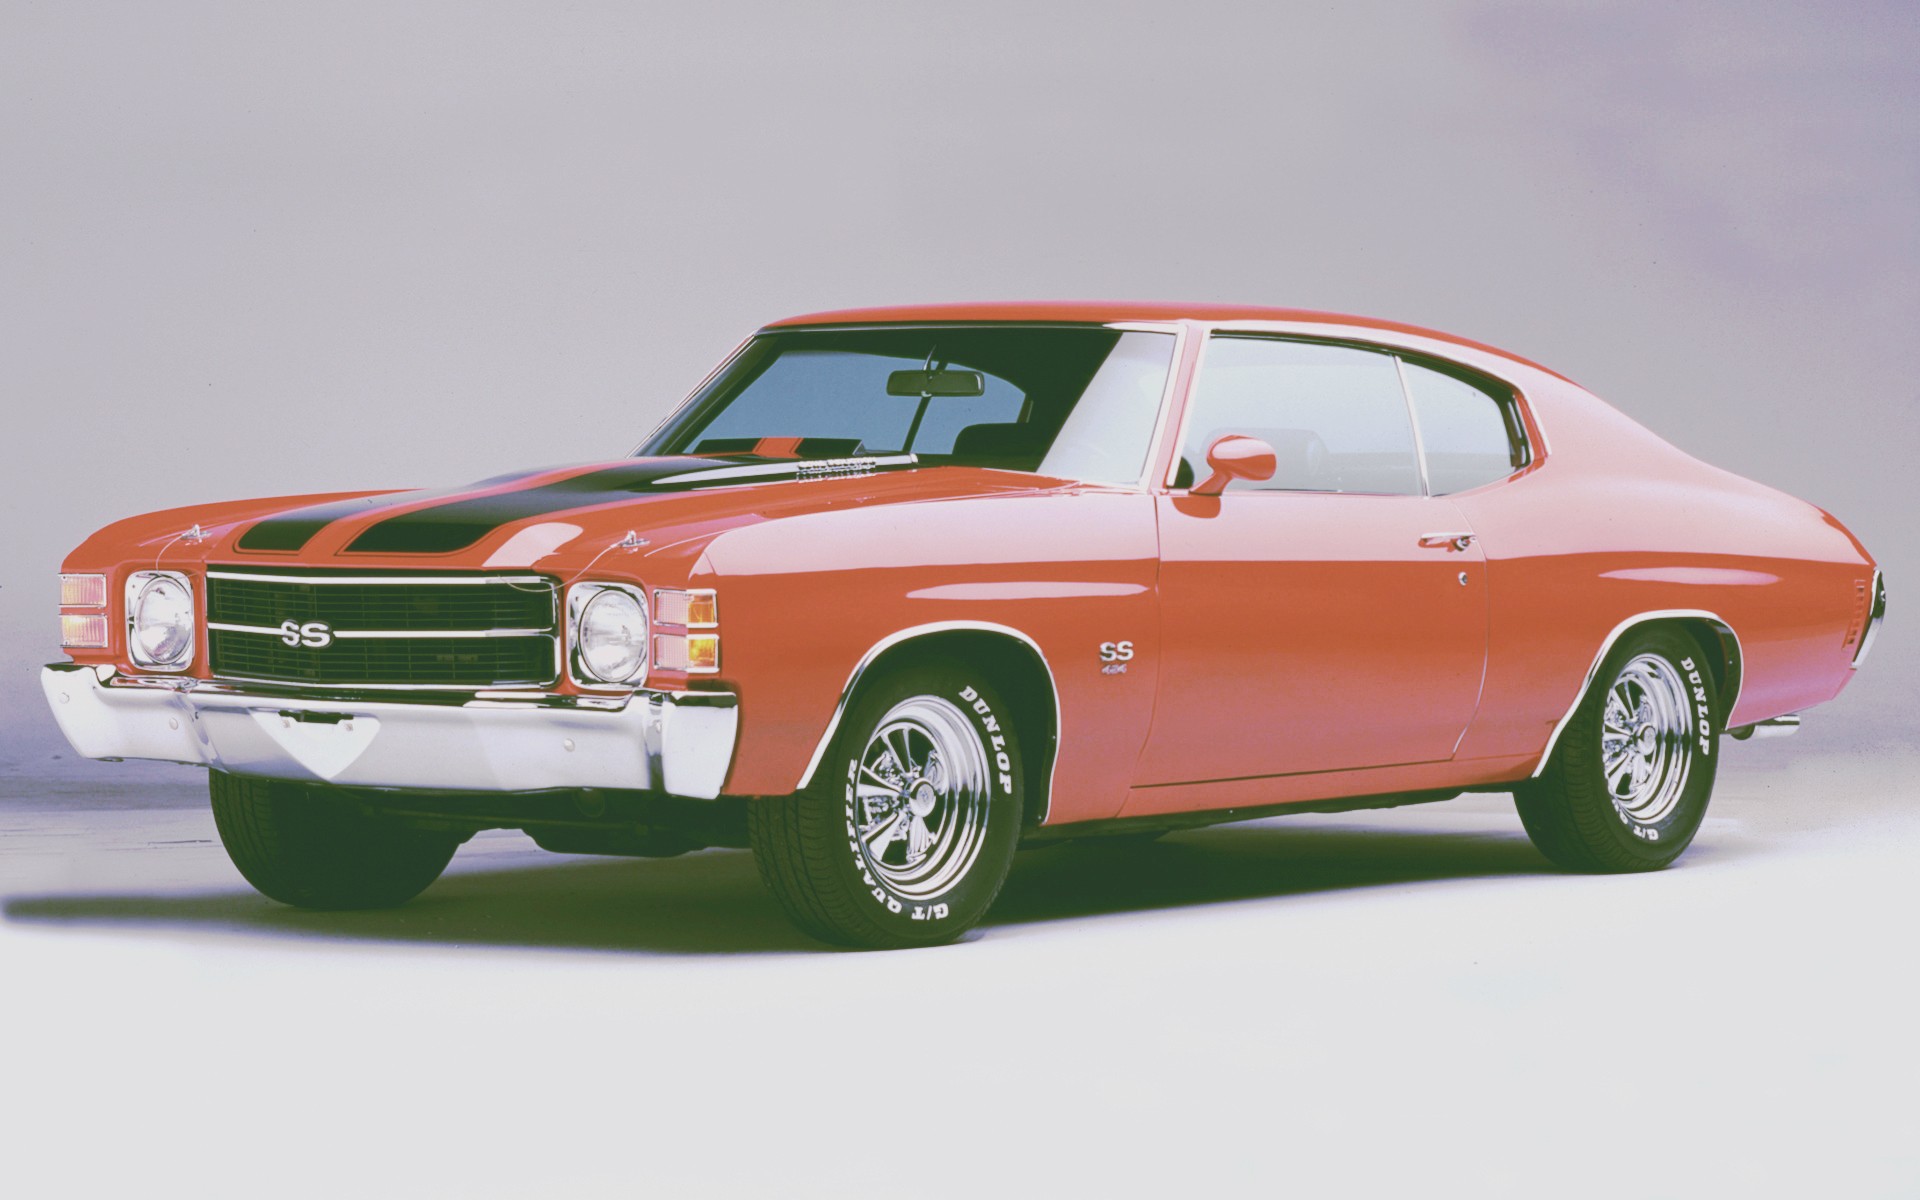 General 1920x1200 muscle cars Chevelle SS red cars vehicle car Chevrolet American cars racing stripes classic car